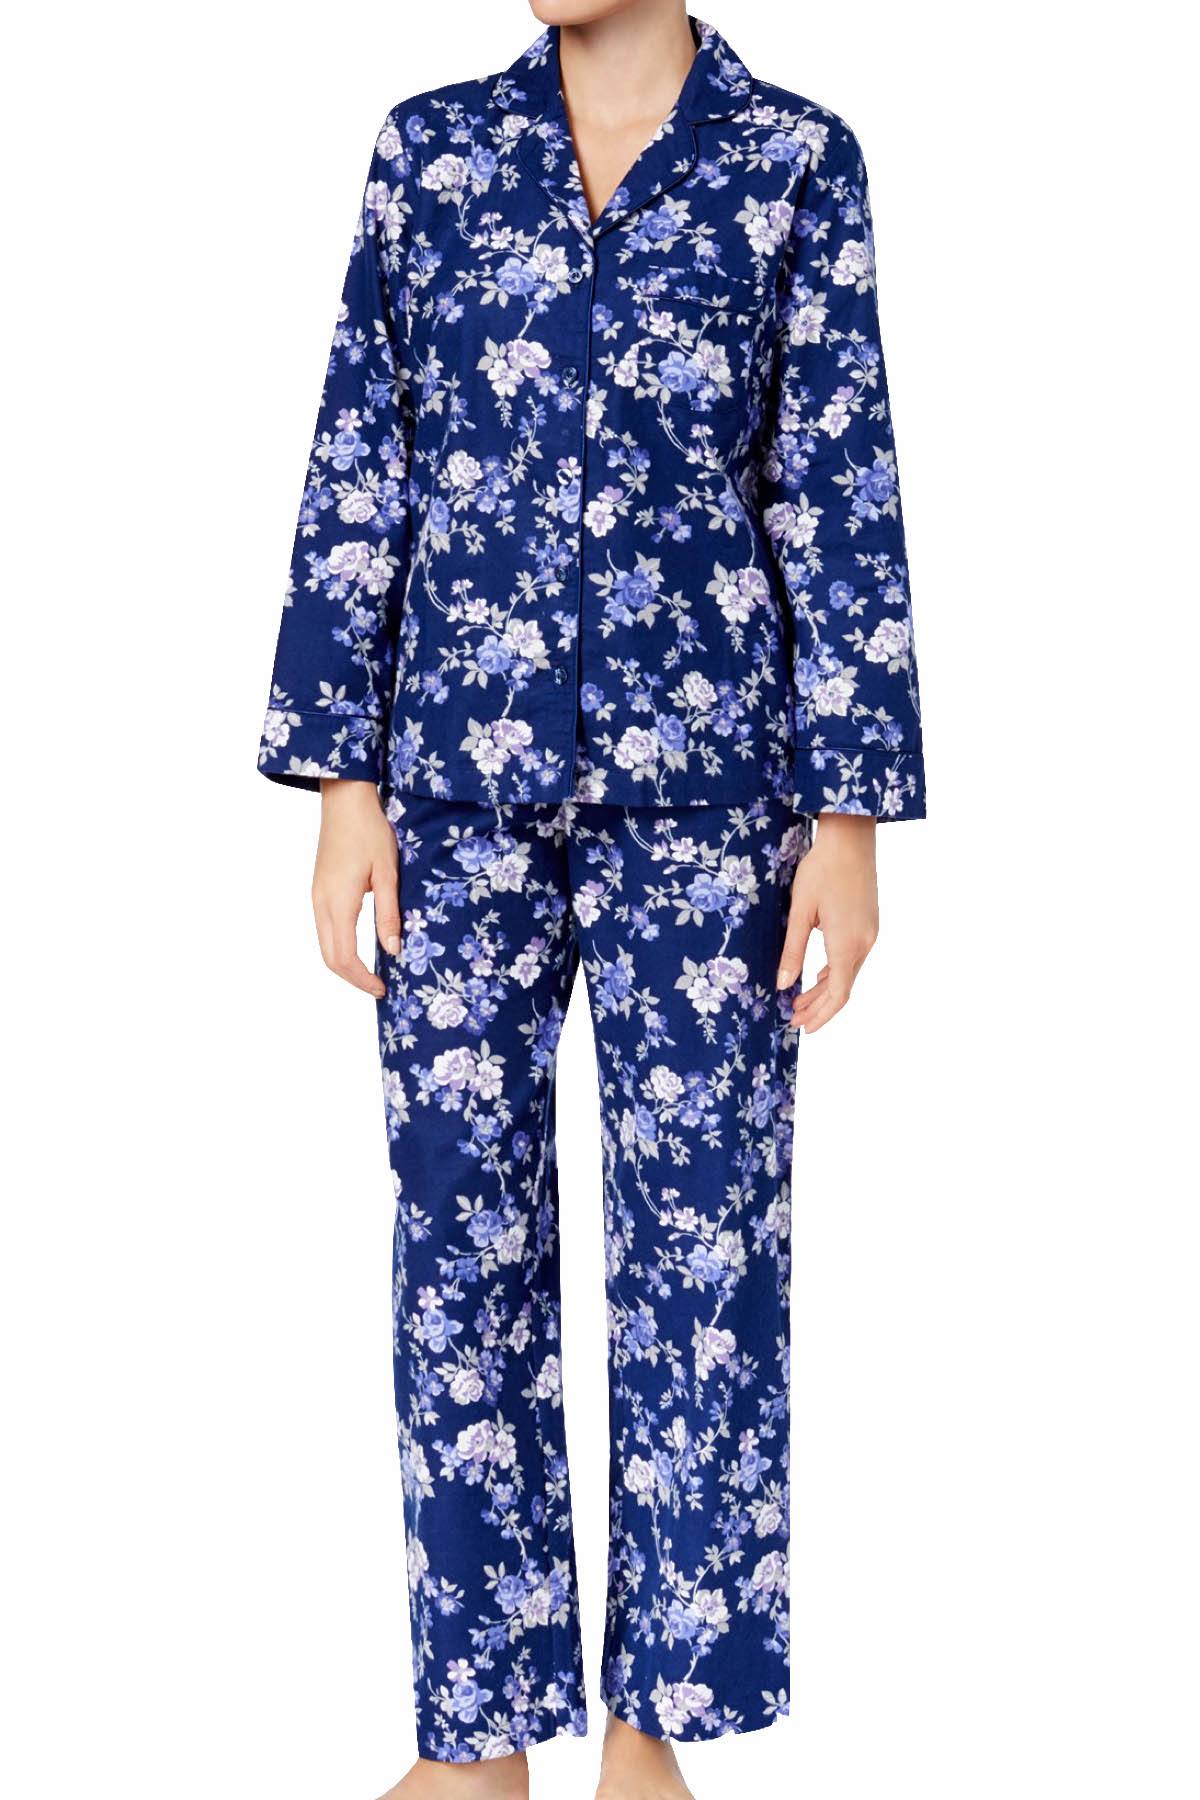 Charter Club Intimates Rose-Garden Floral-Printed Cotton/Flannel Pajama Set